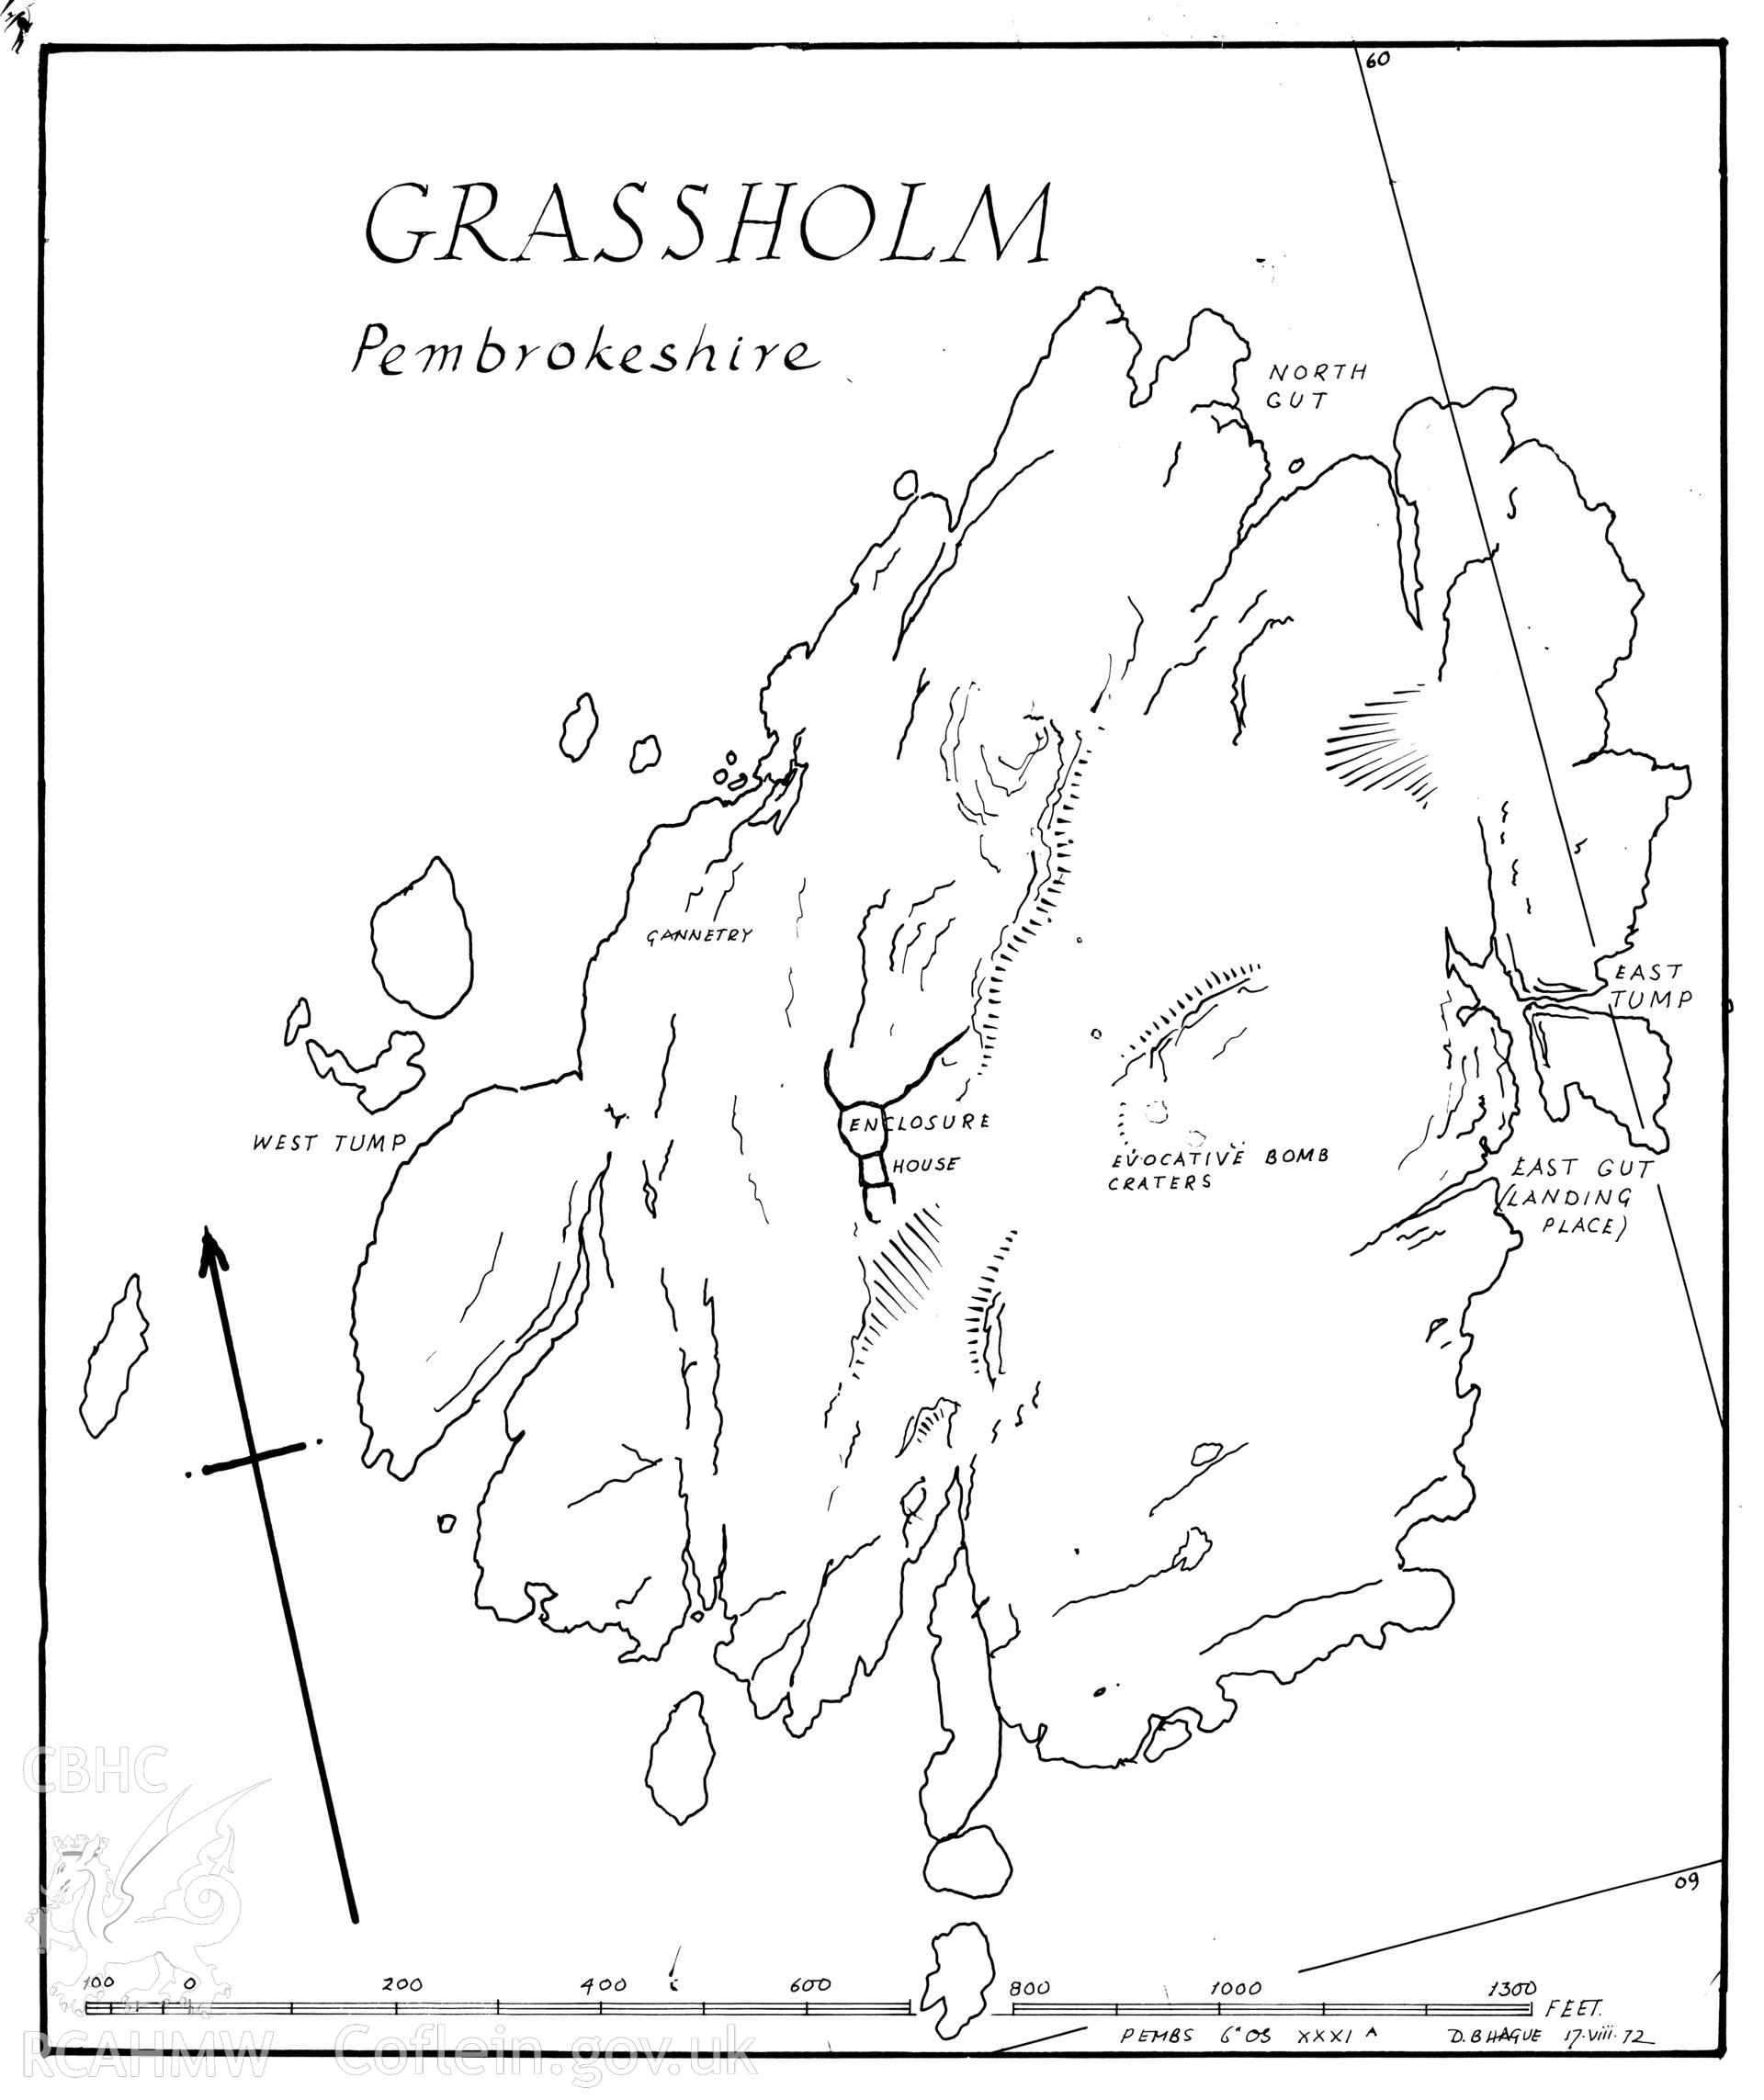 Map of Grassholm Island, produced by Douglas Hague, August 1972.